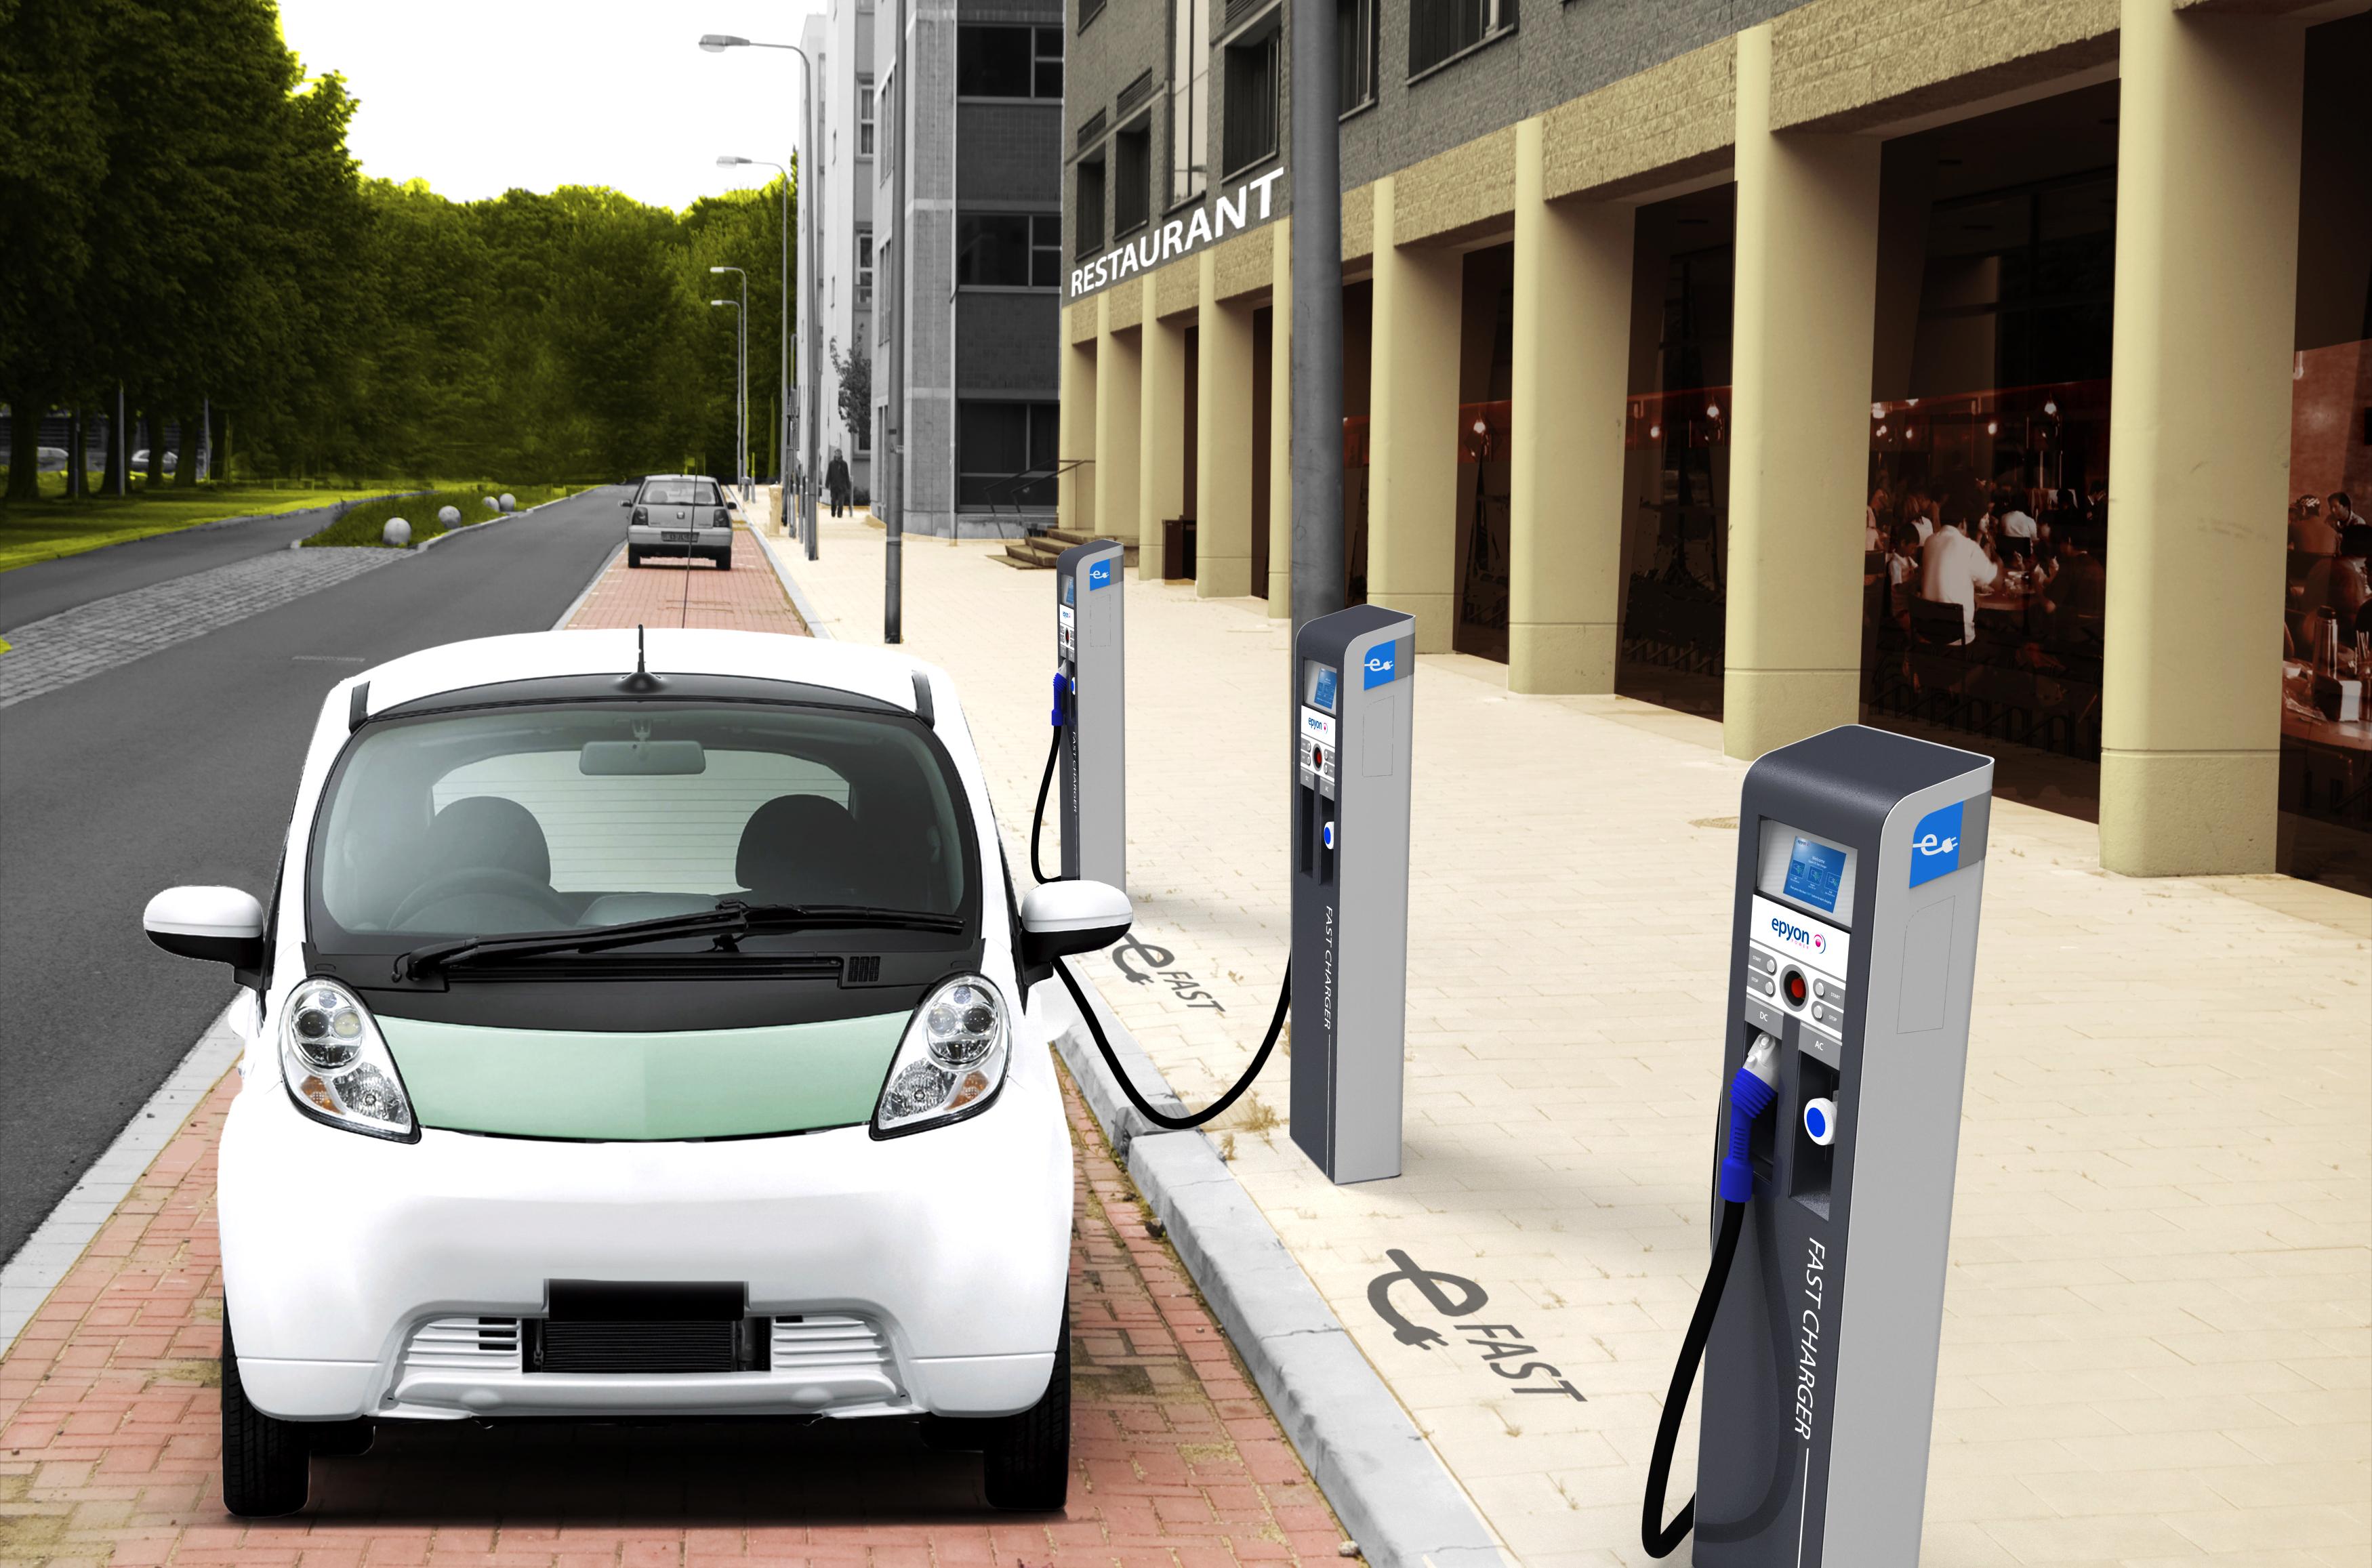 Electric Vehicle Charging Services Market Analysis, Research, Share, Growth, Sales, Trends, Forecast by 2028